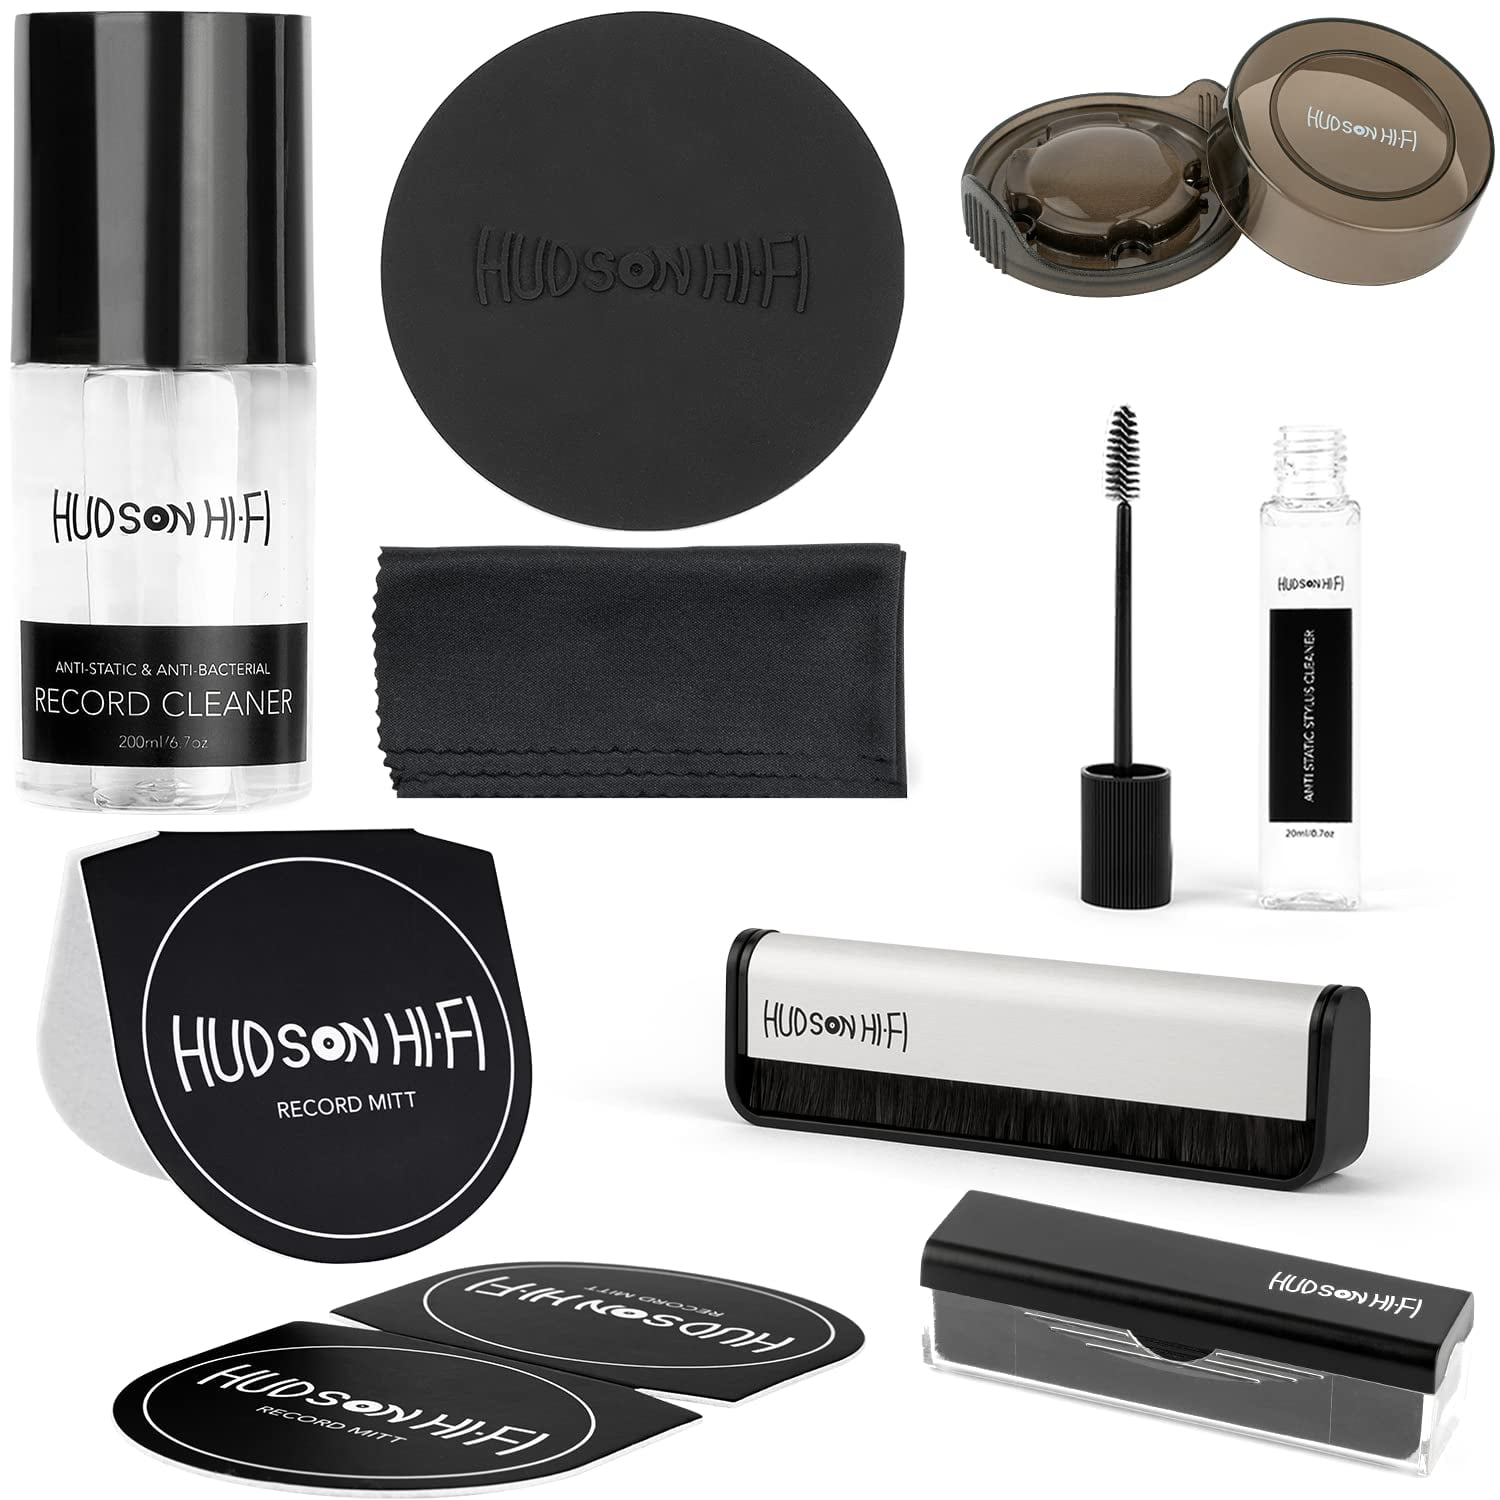 Hudson Hi-Fi Vinyl Record Cleaning Kit - Complete 9 1 Vinyl Record Cleaner Kit - All Essential Vinyl Record Player Accessories for a Record Cleaning System - Walmart.com